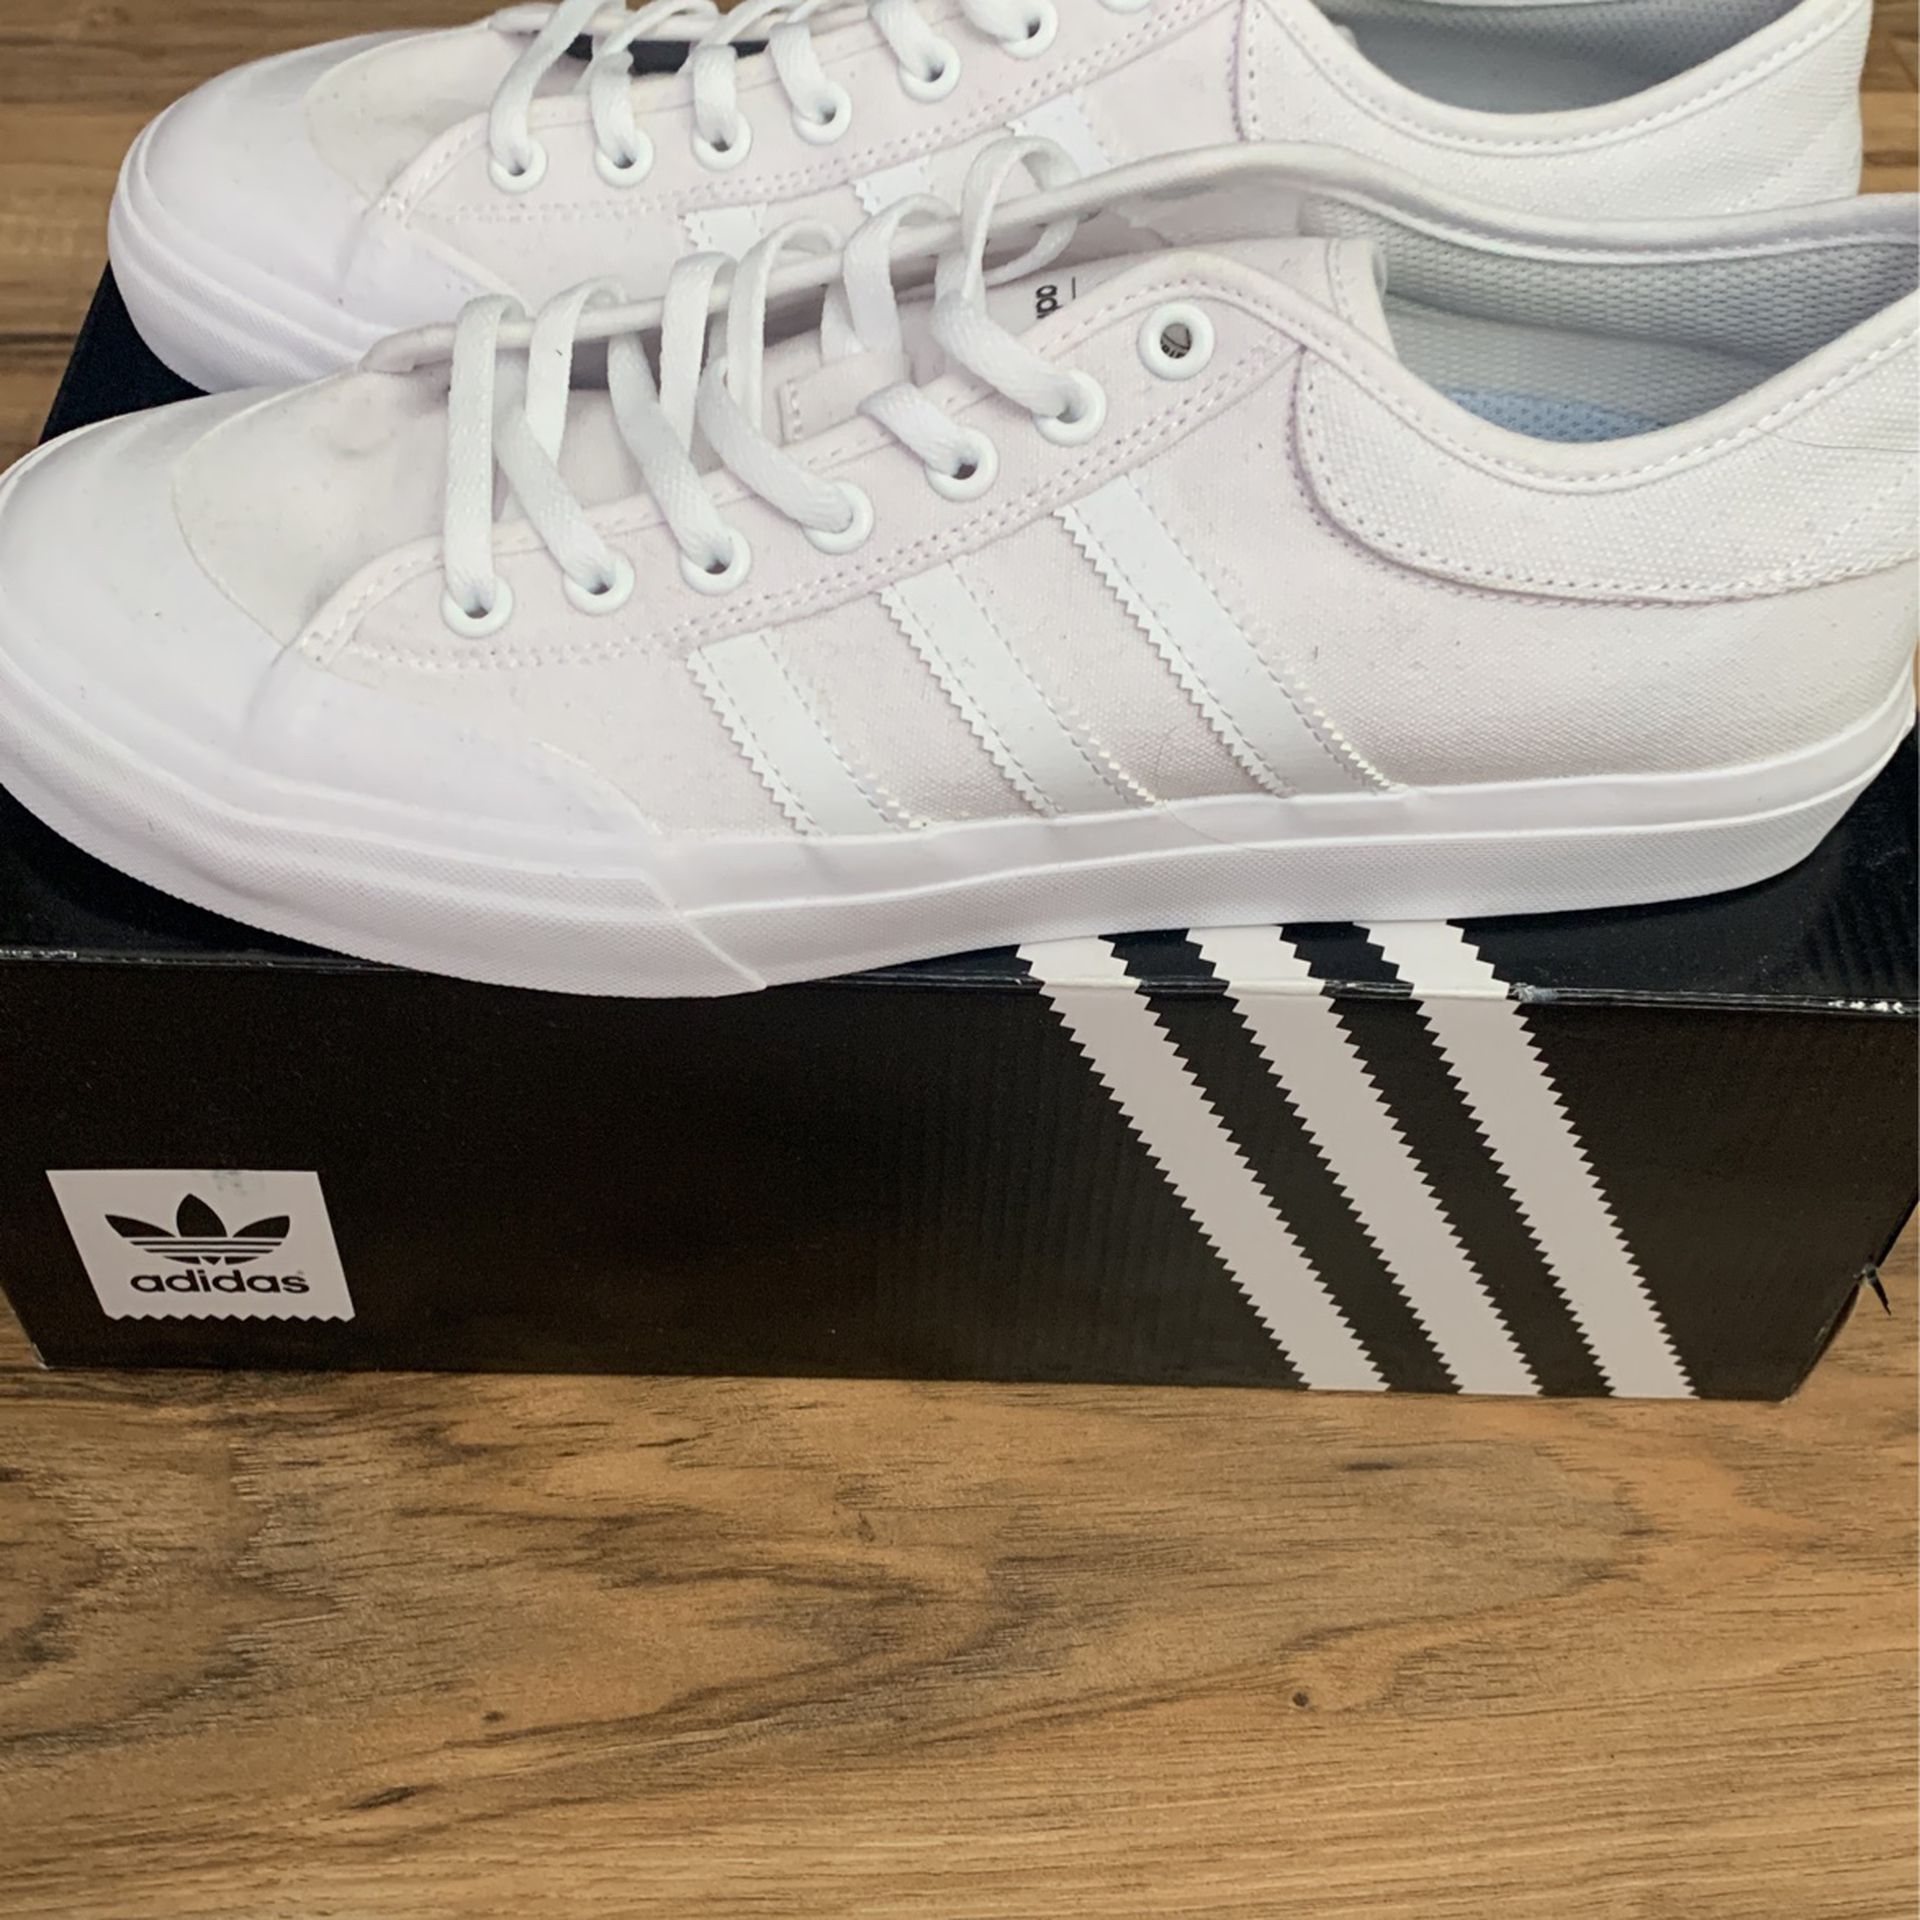 Adidas Men US Sz 10 White Brand New for Sale in Las Vegas, NV - OfferUp